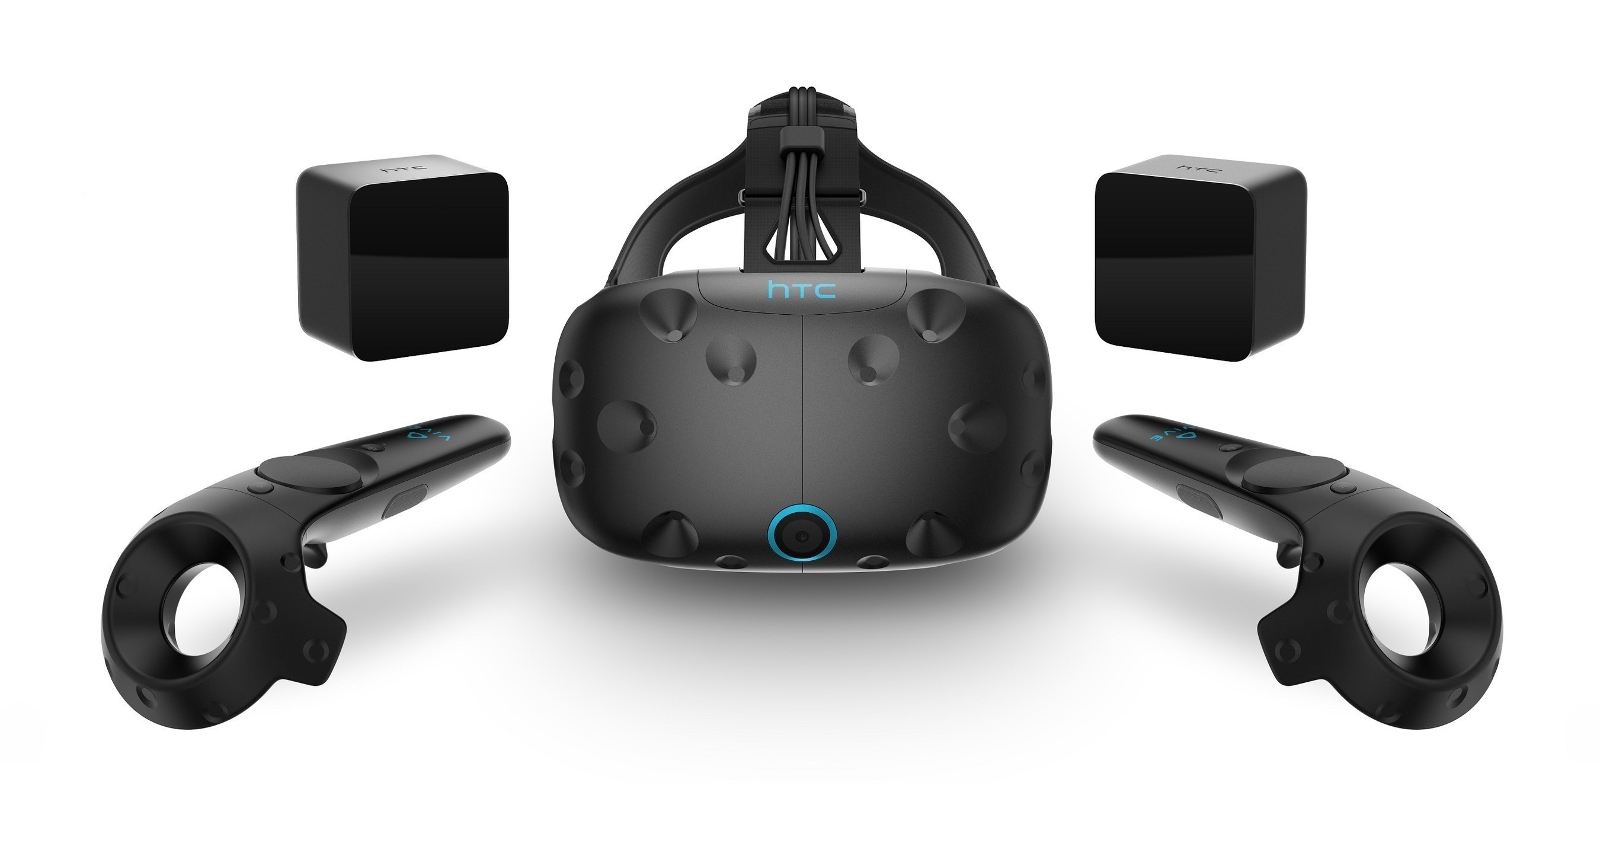 HTC kündigt Business Edition seines Virtual-Reality-Systems Vive an